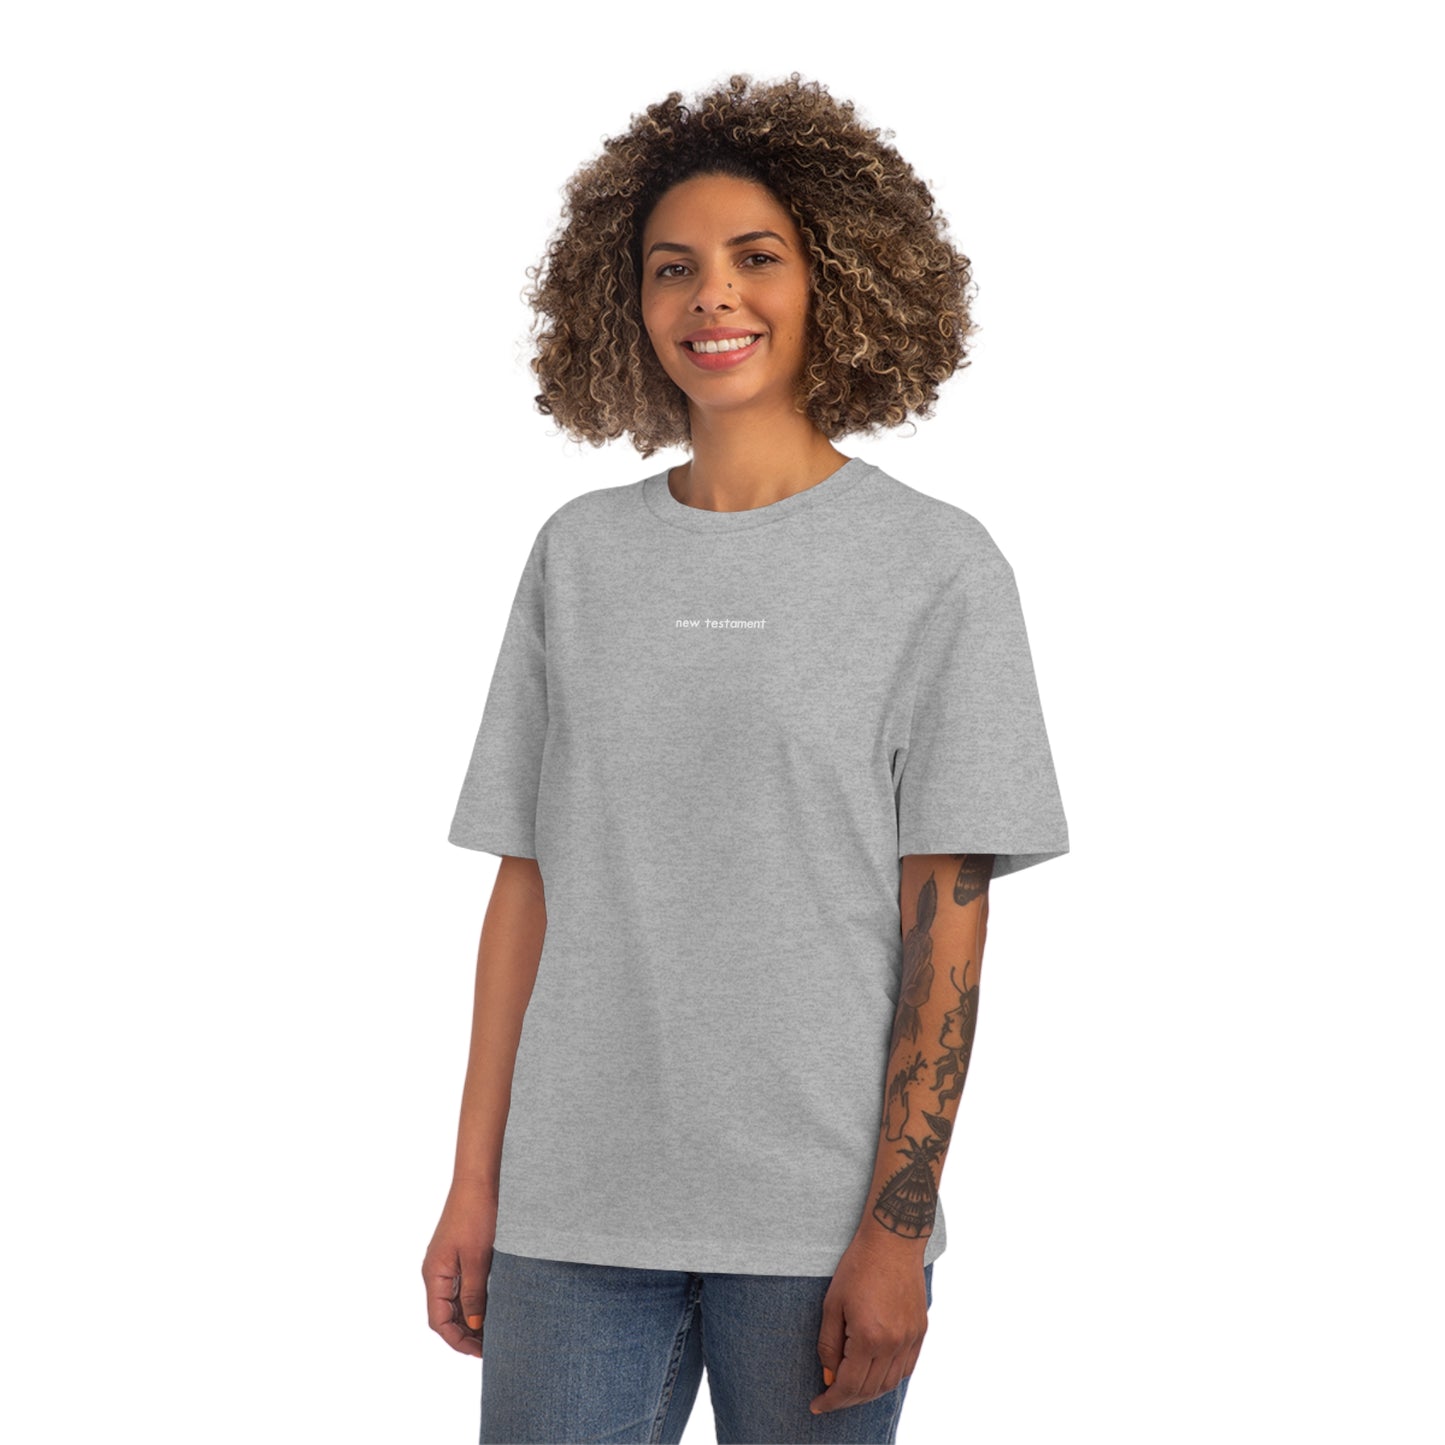 Relaxed Fit T tetelestai